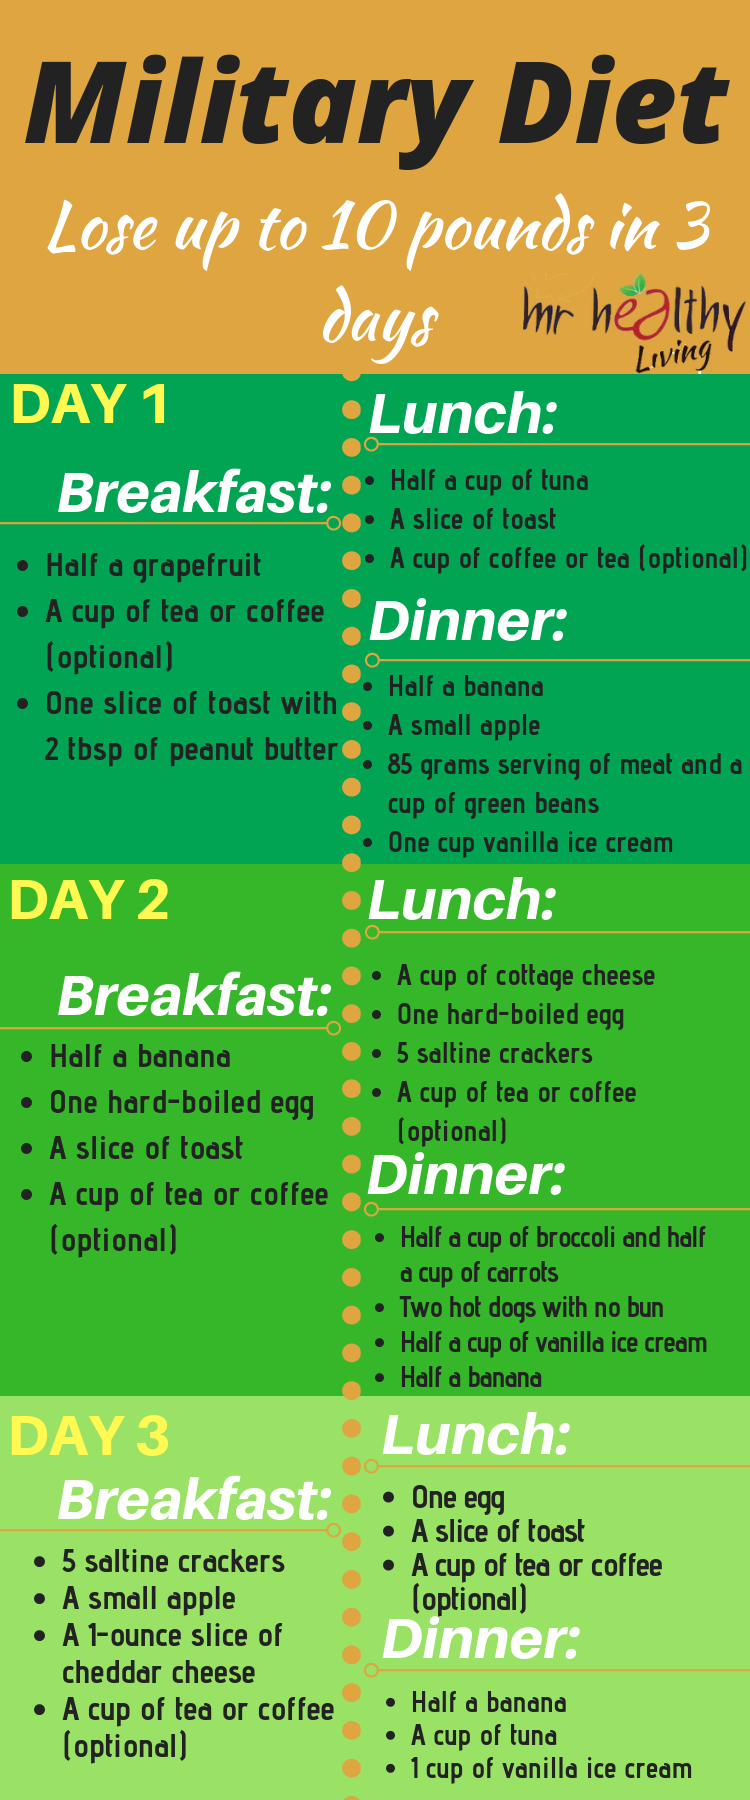 15 diet Before And After eating plans ideas